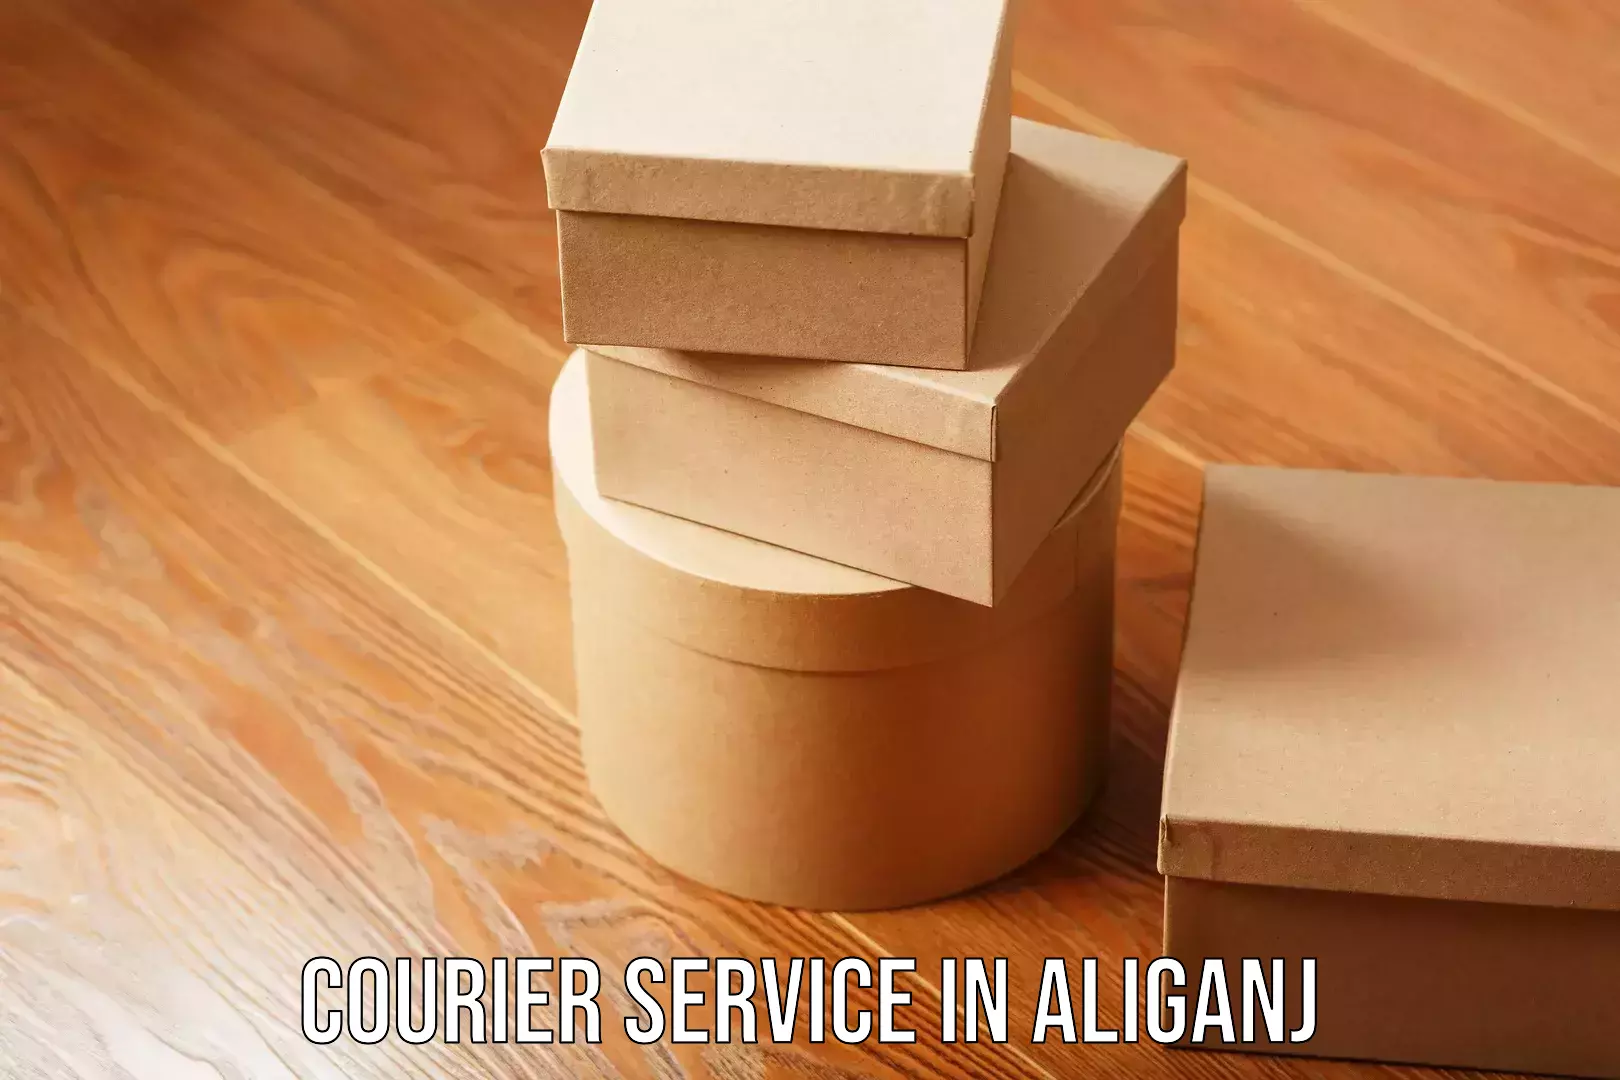 On-call courier service in Aliganj